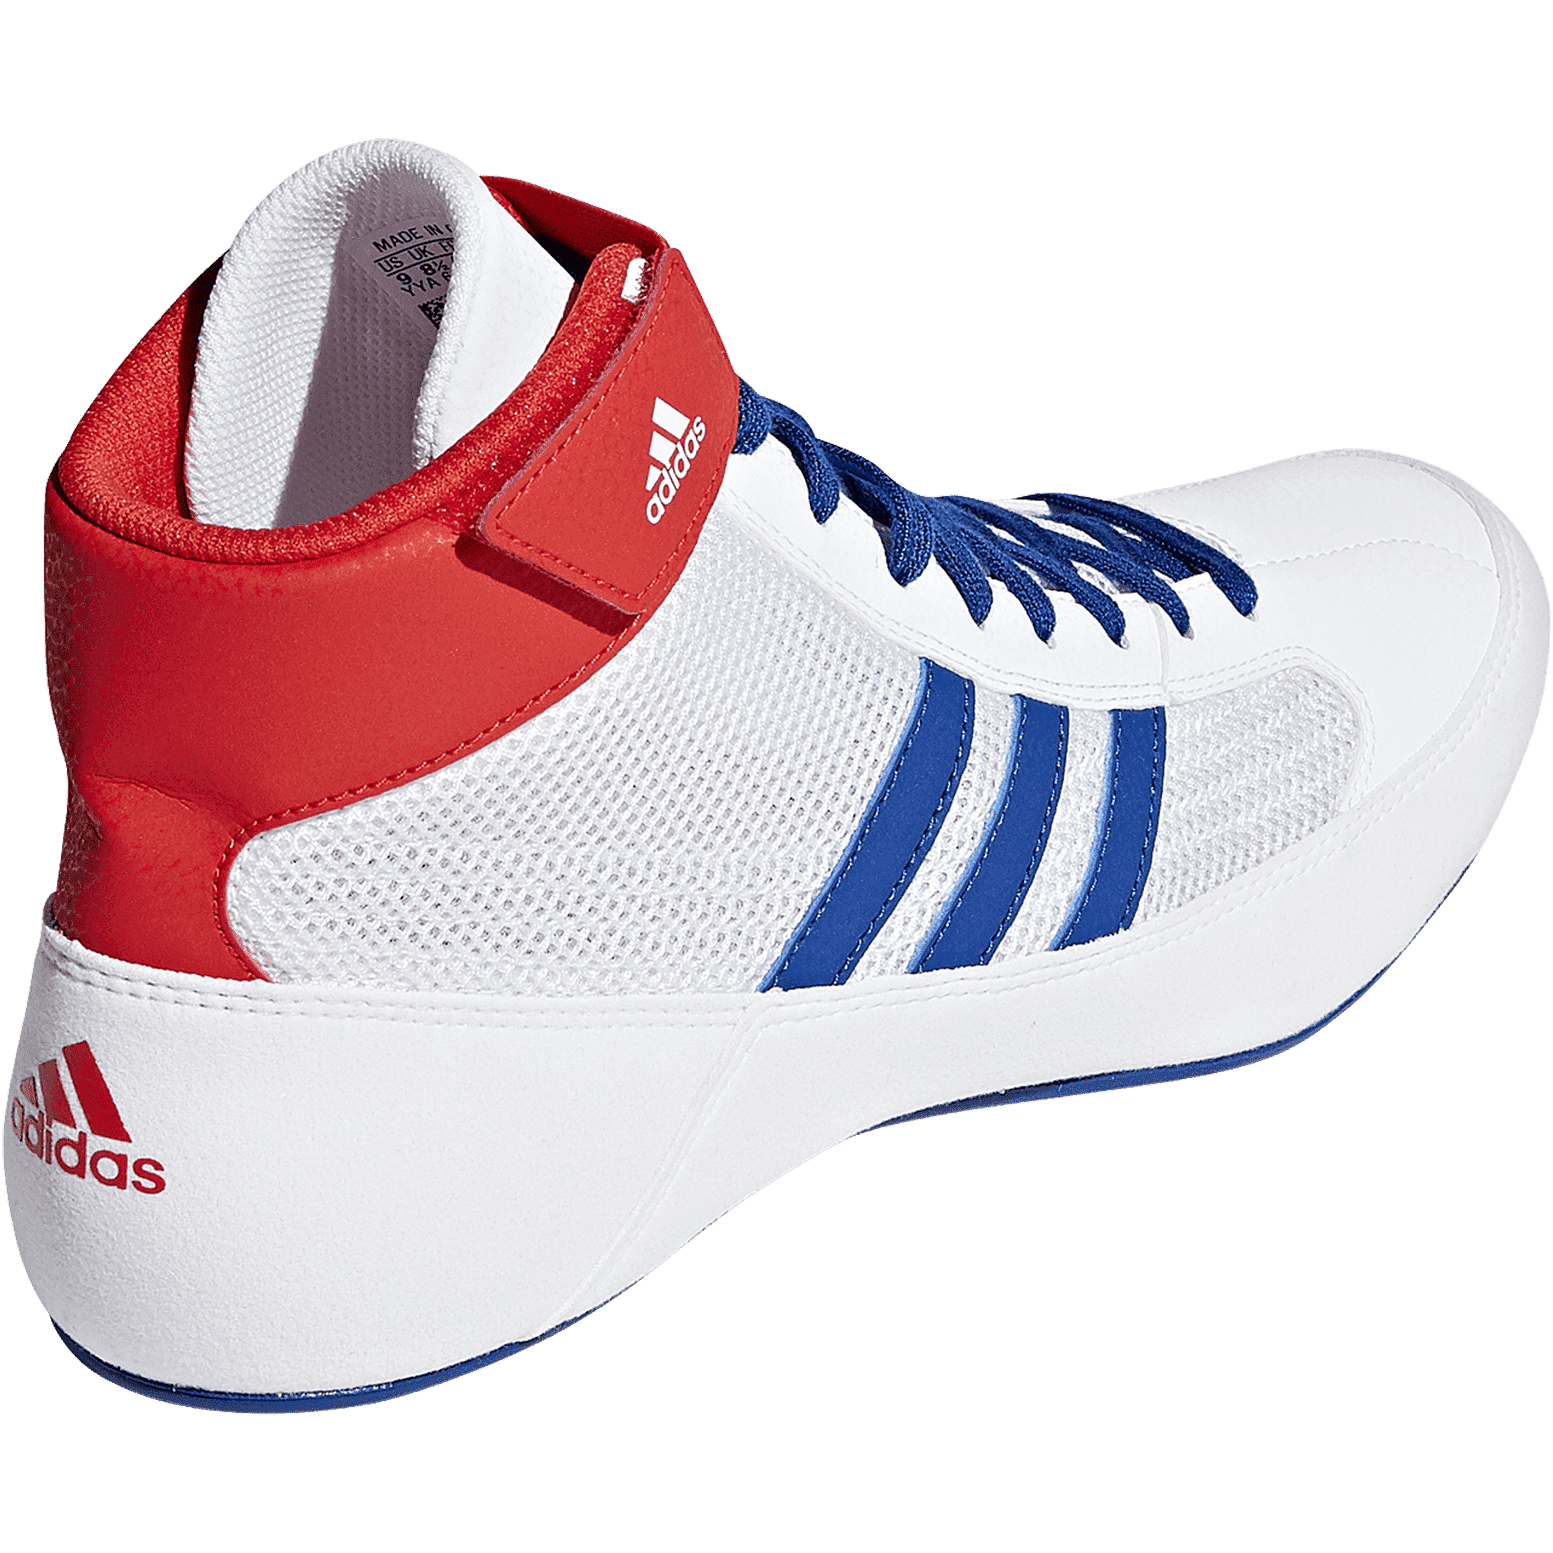 Adidas 222 HVC 2 Youth Laced Wrestling Shoes - White Red Royal